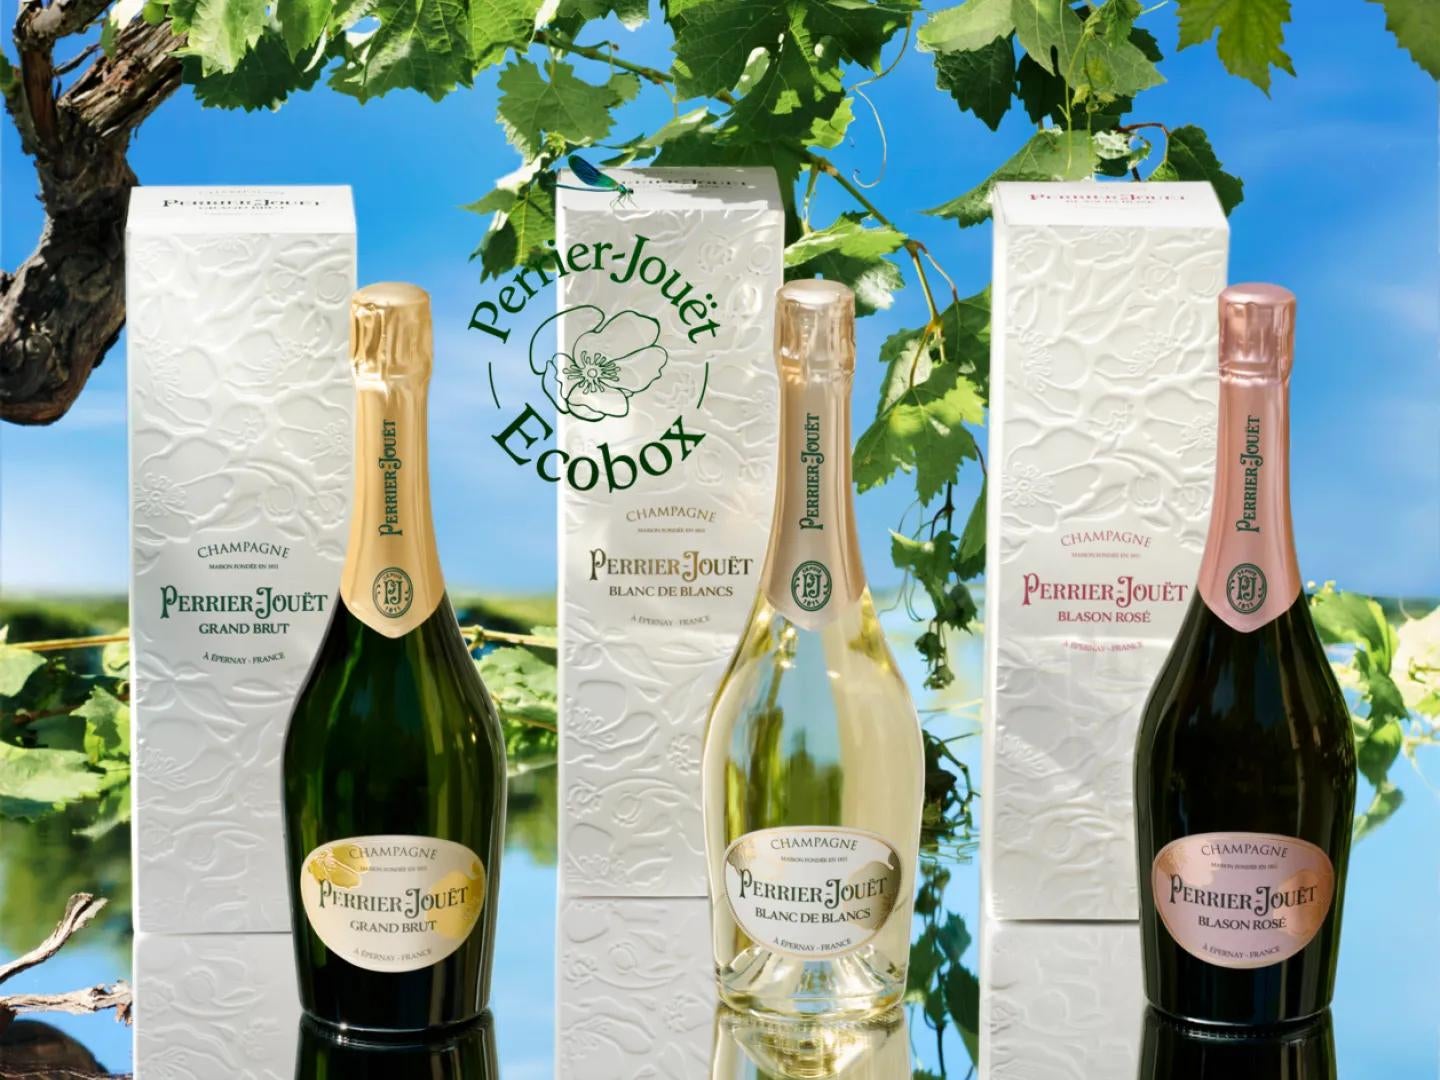 Three bottles in a row with eco-friendly packaging behind with vines and blue sky in the background